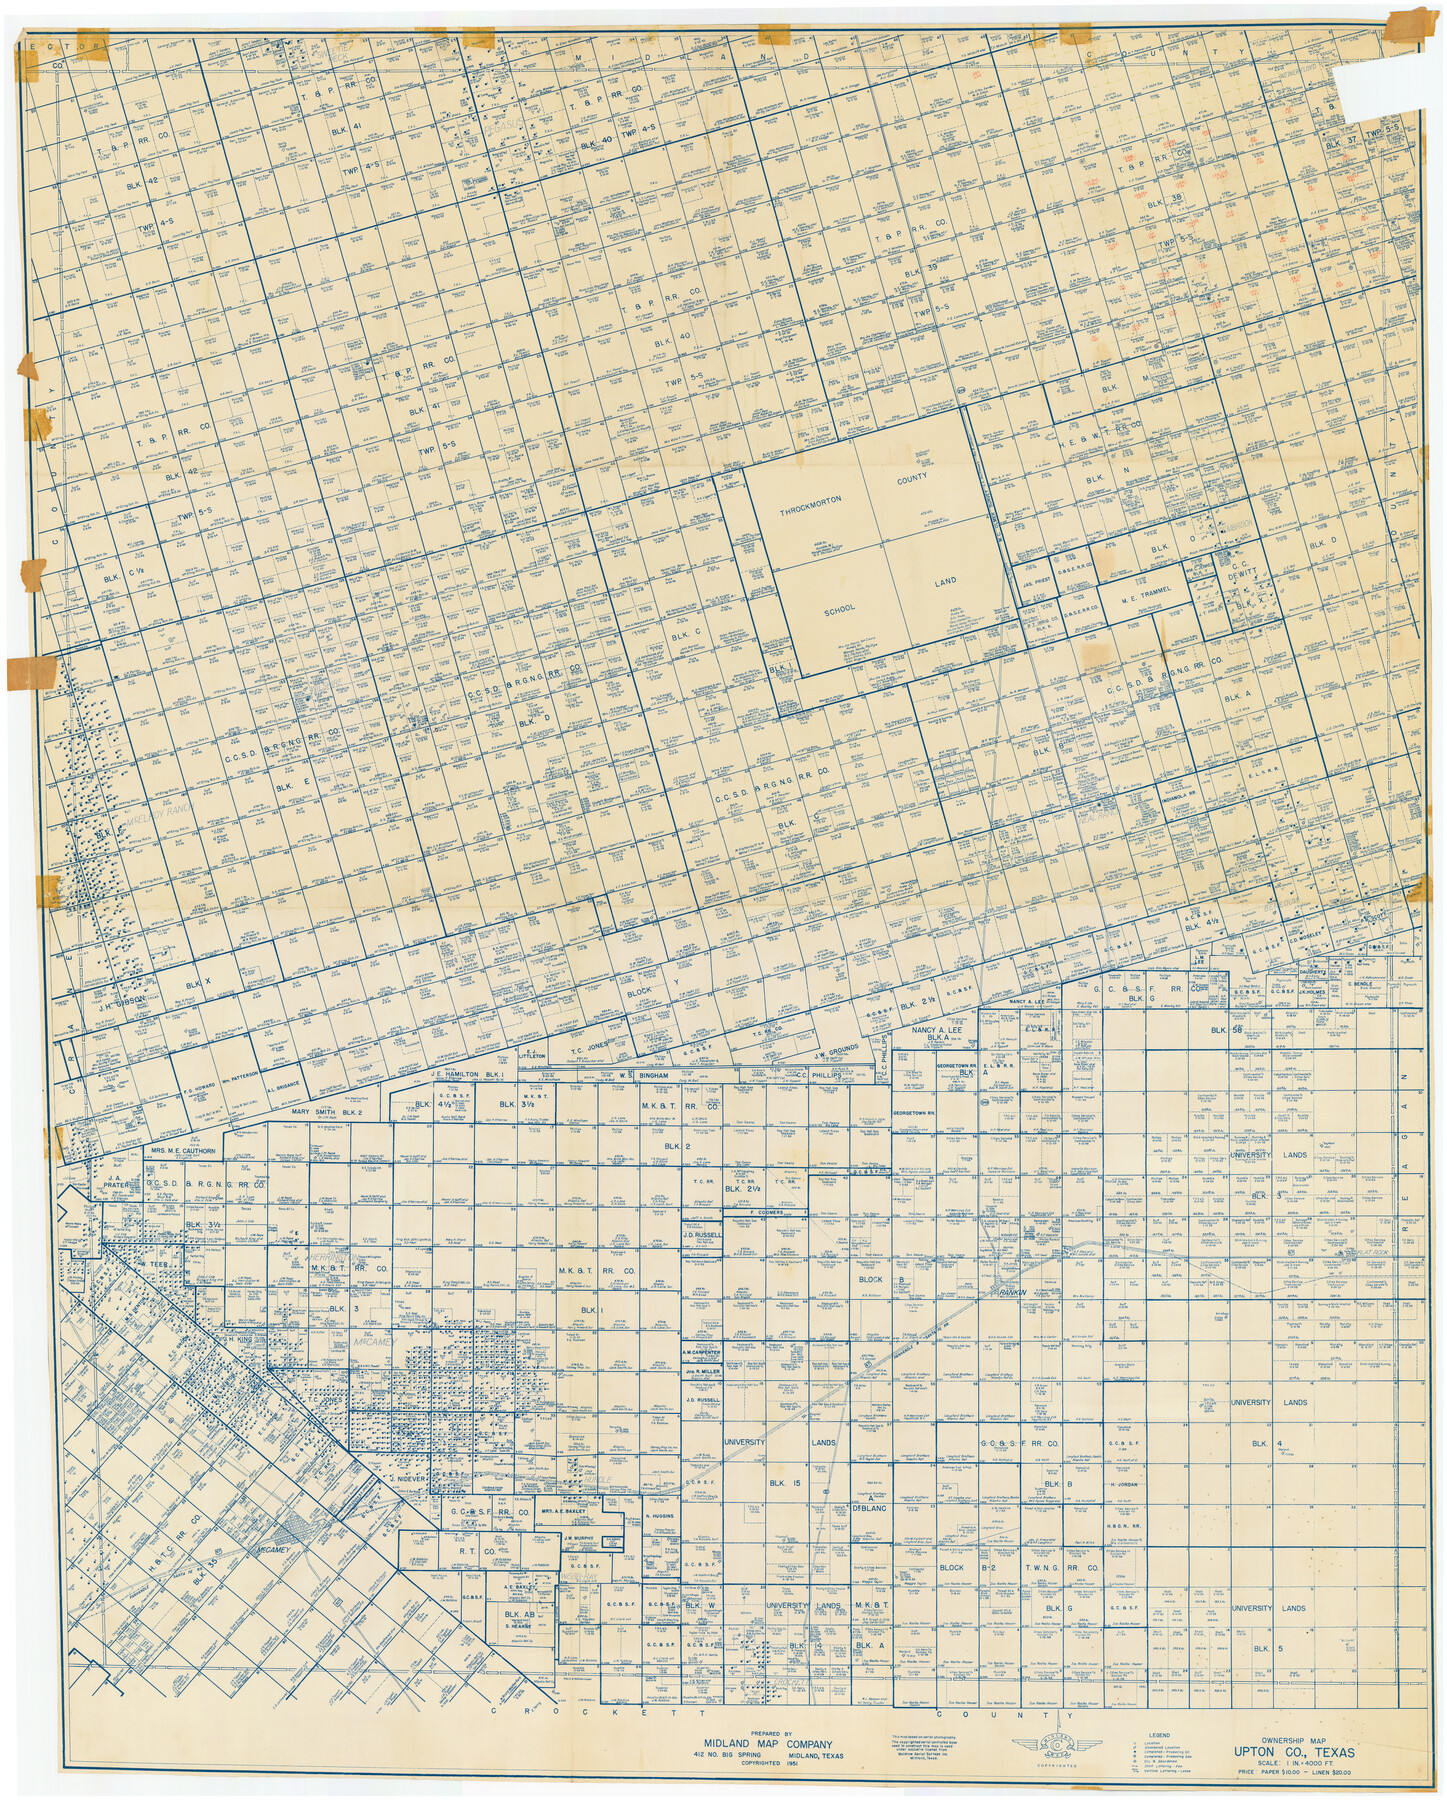 89904, Ownership Map Upton Co., Texas, Twichell Survey Records